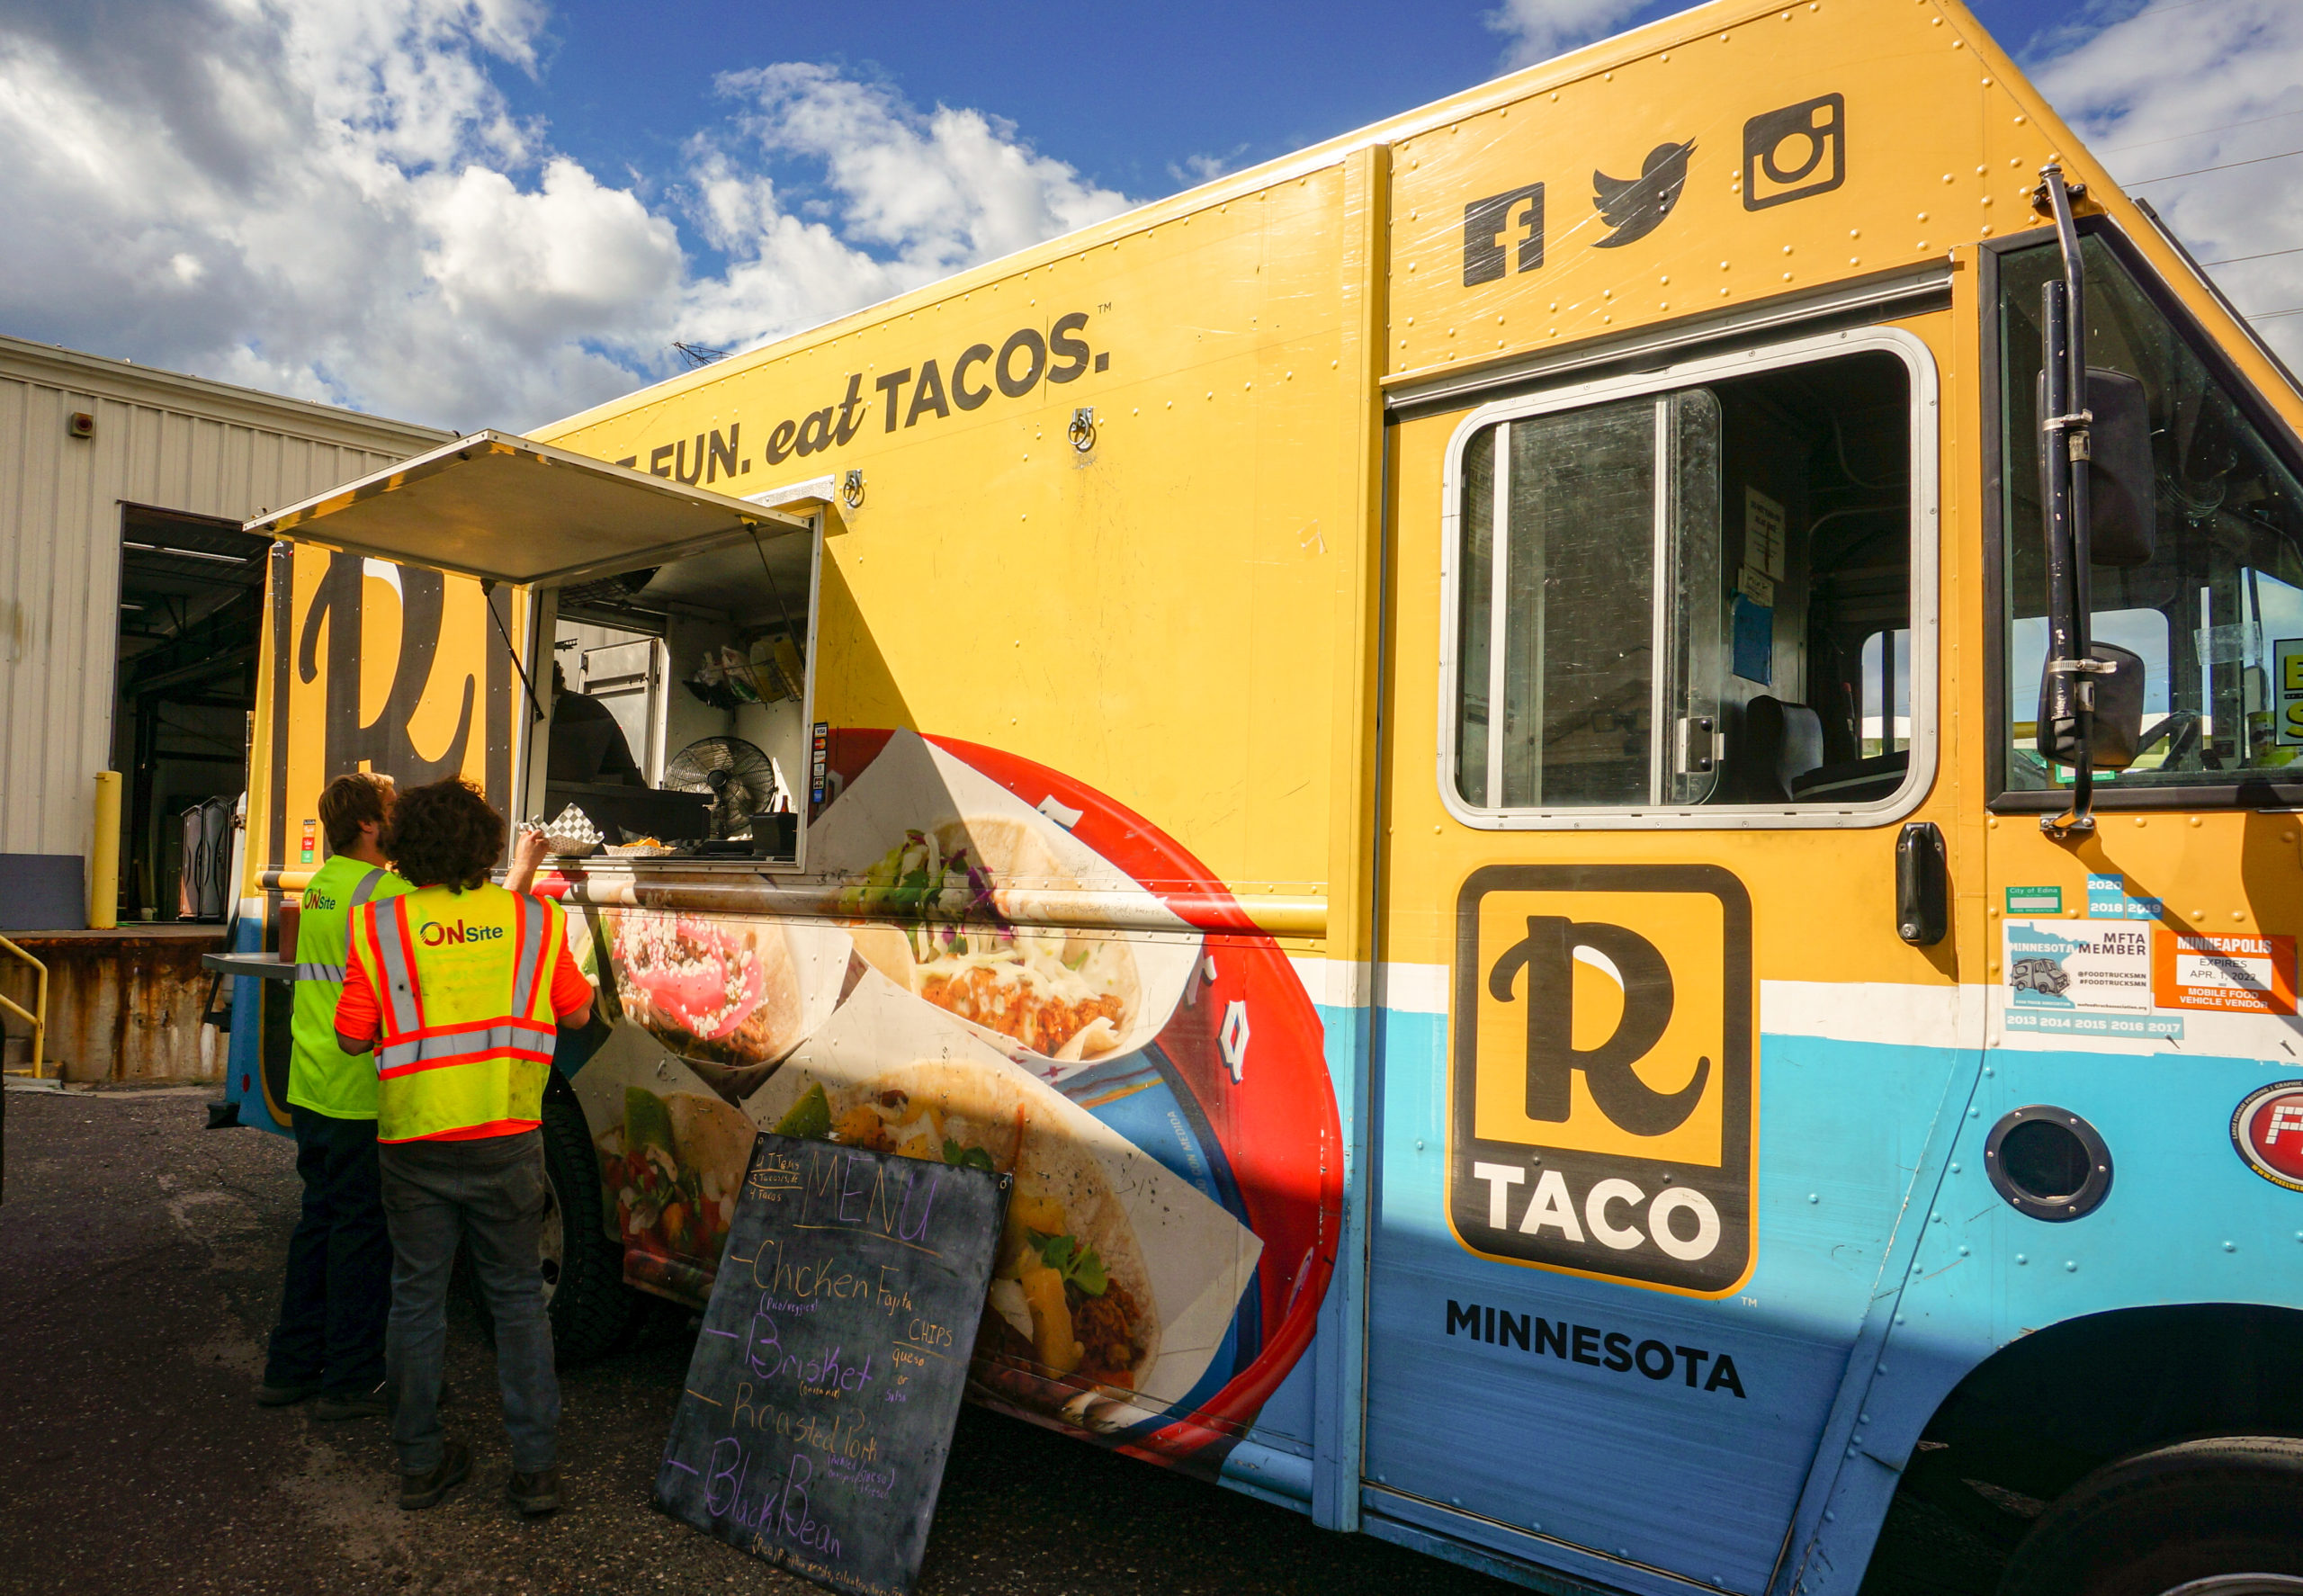 Taco Truck at On Site - Fun at Work